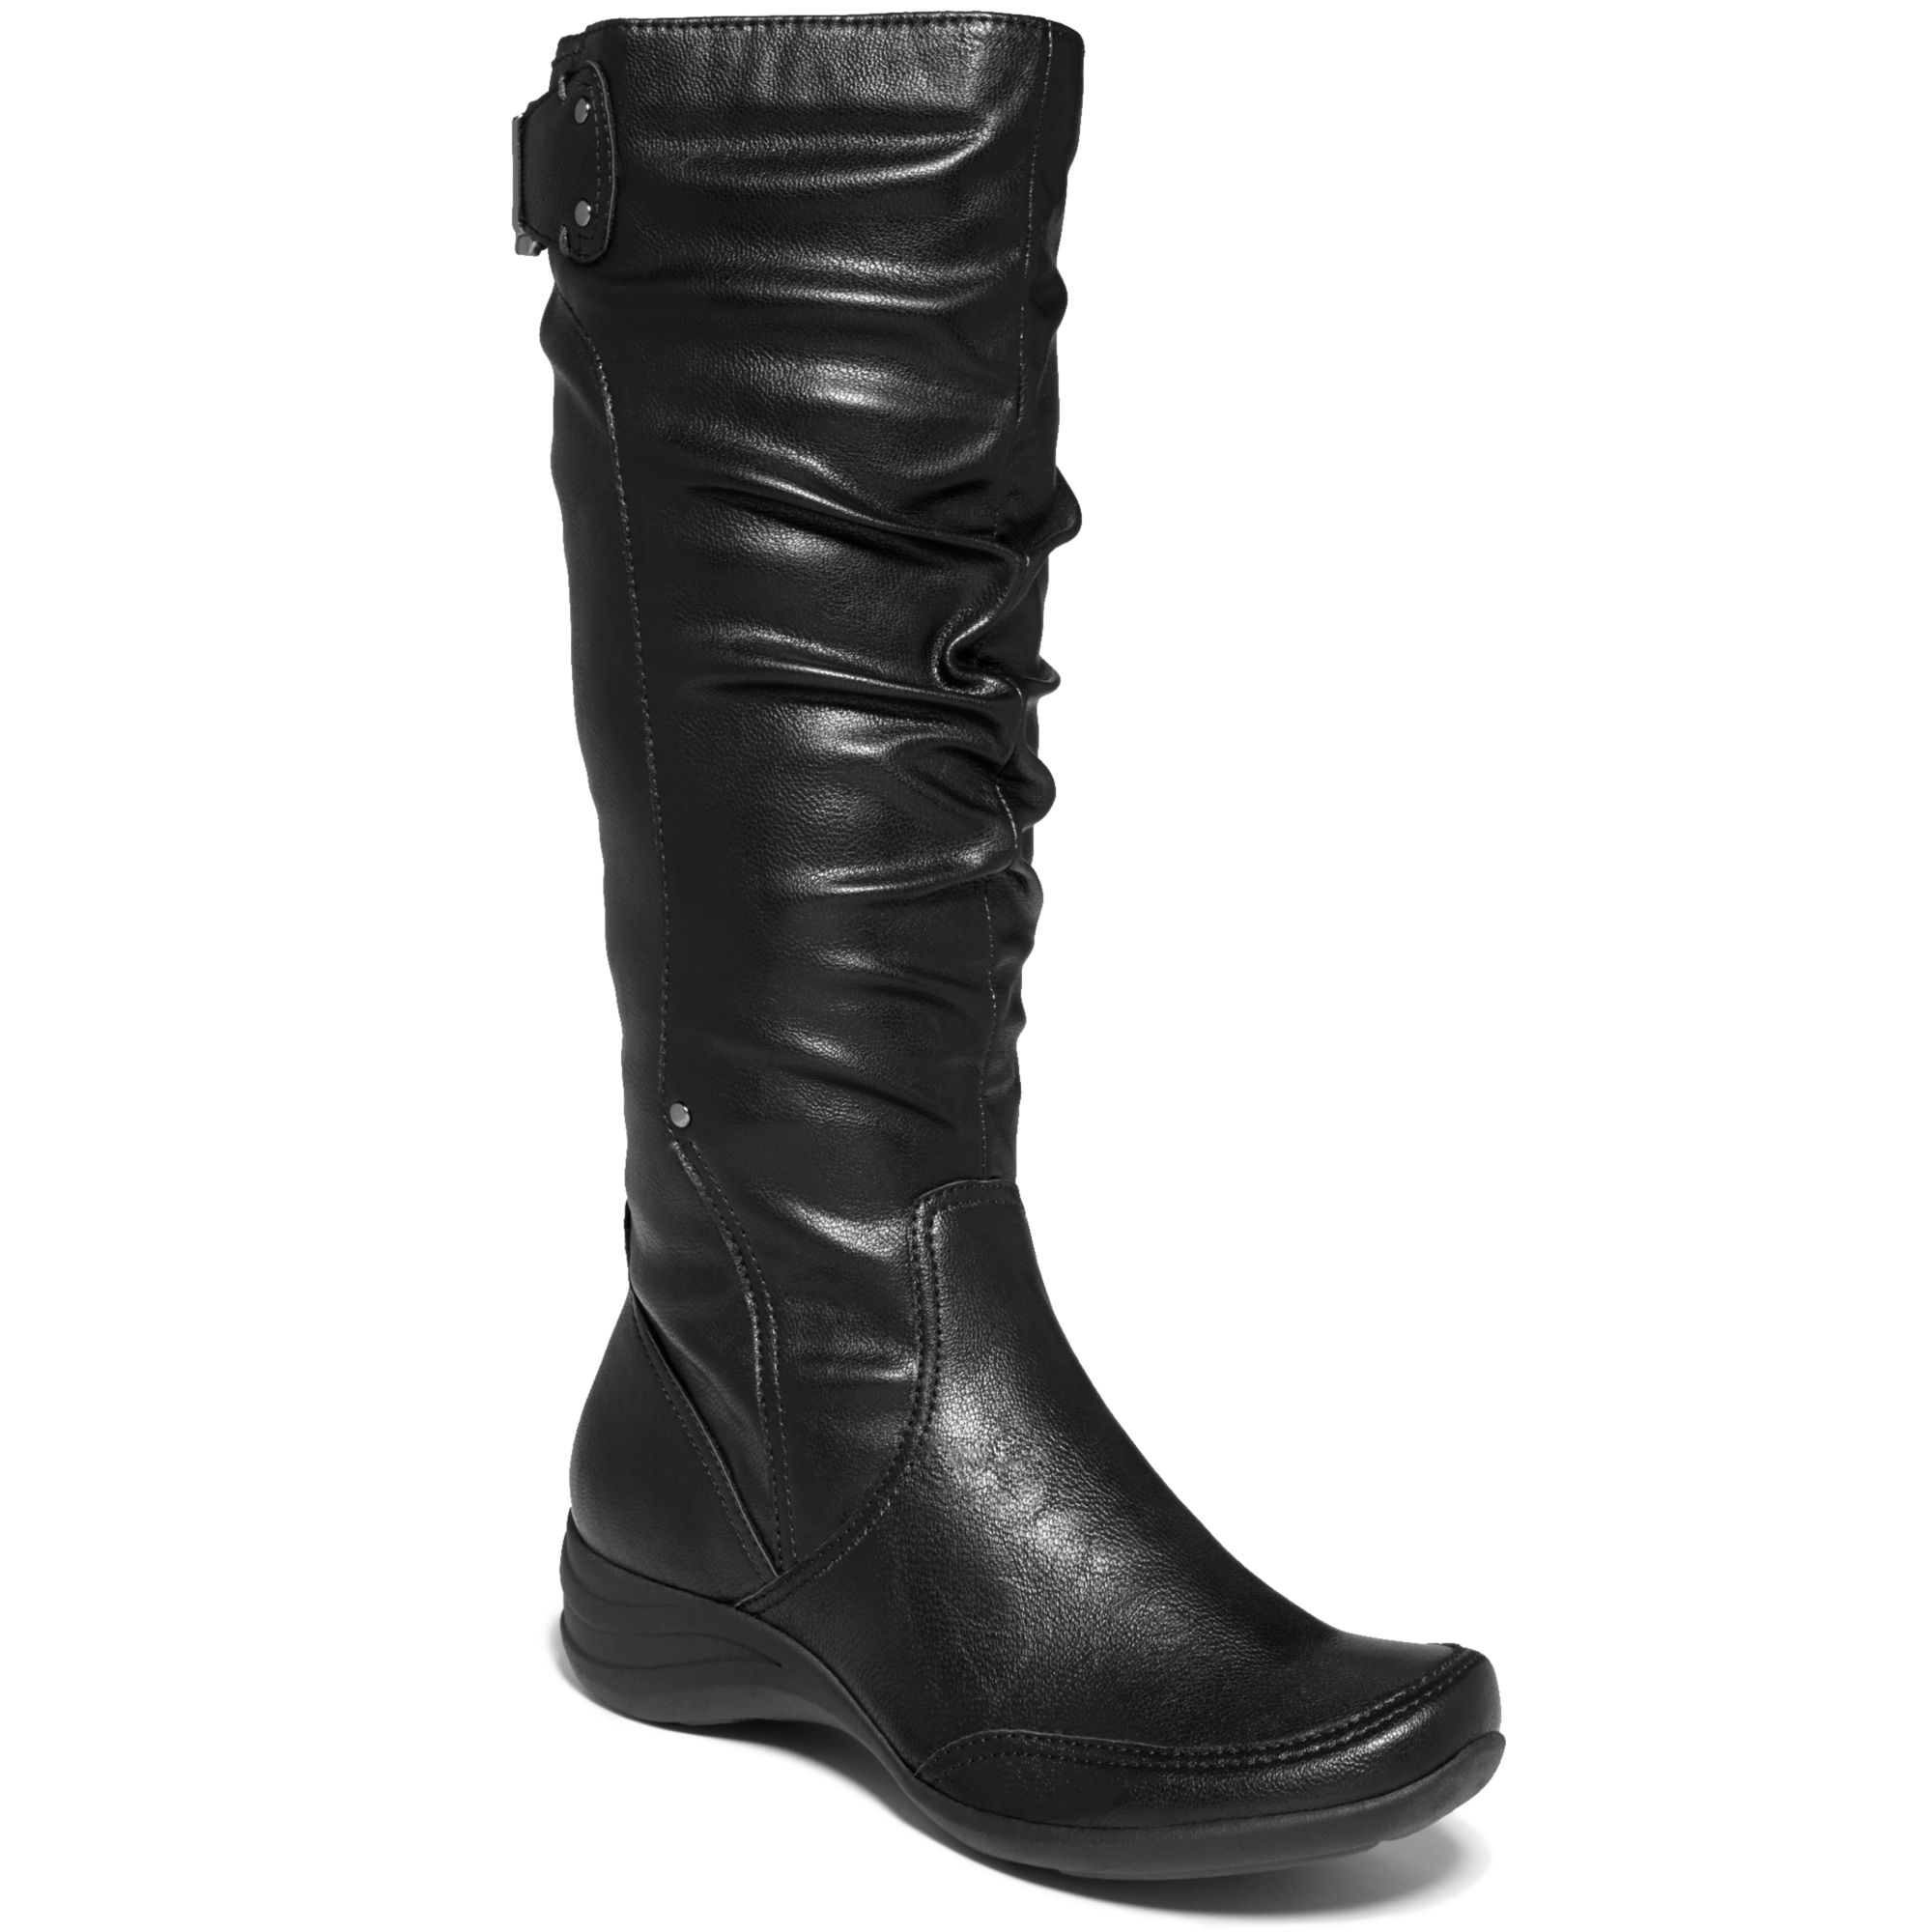 Lyst - Hush Puppies Alternative Wide Calf Boots in Black